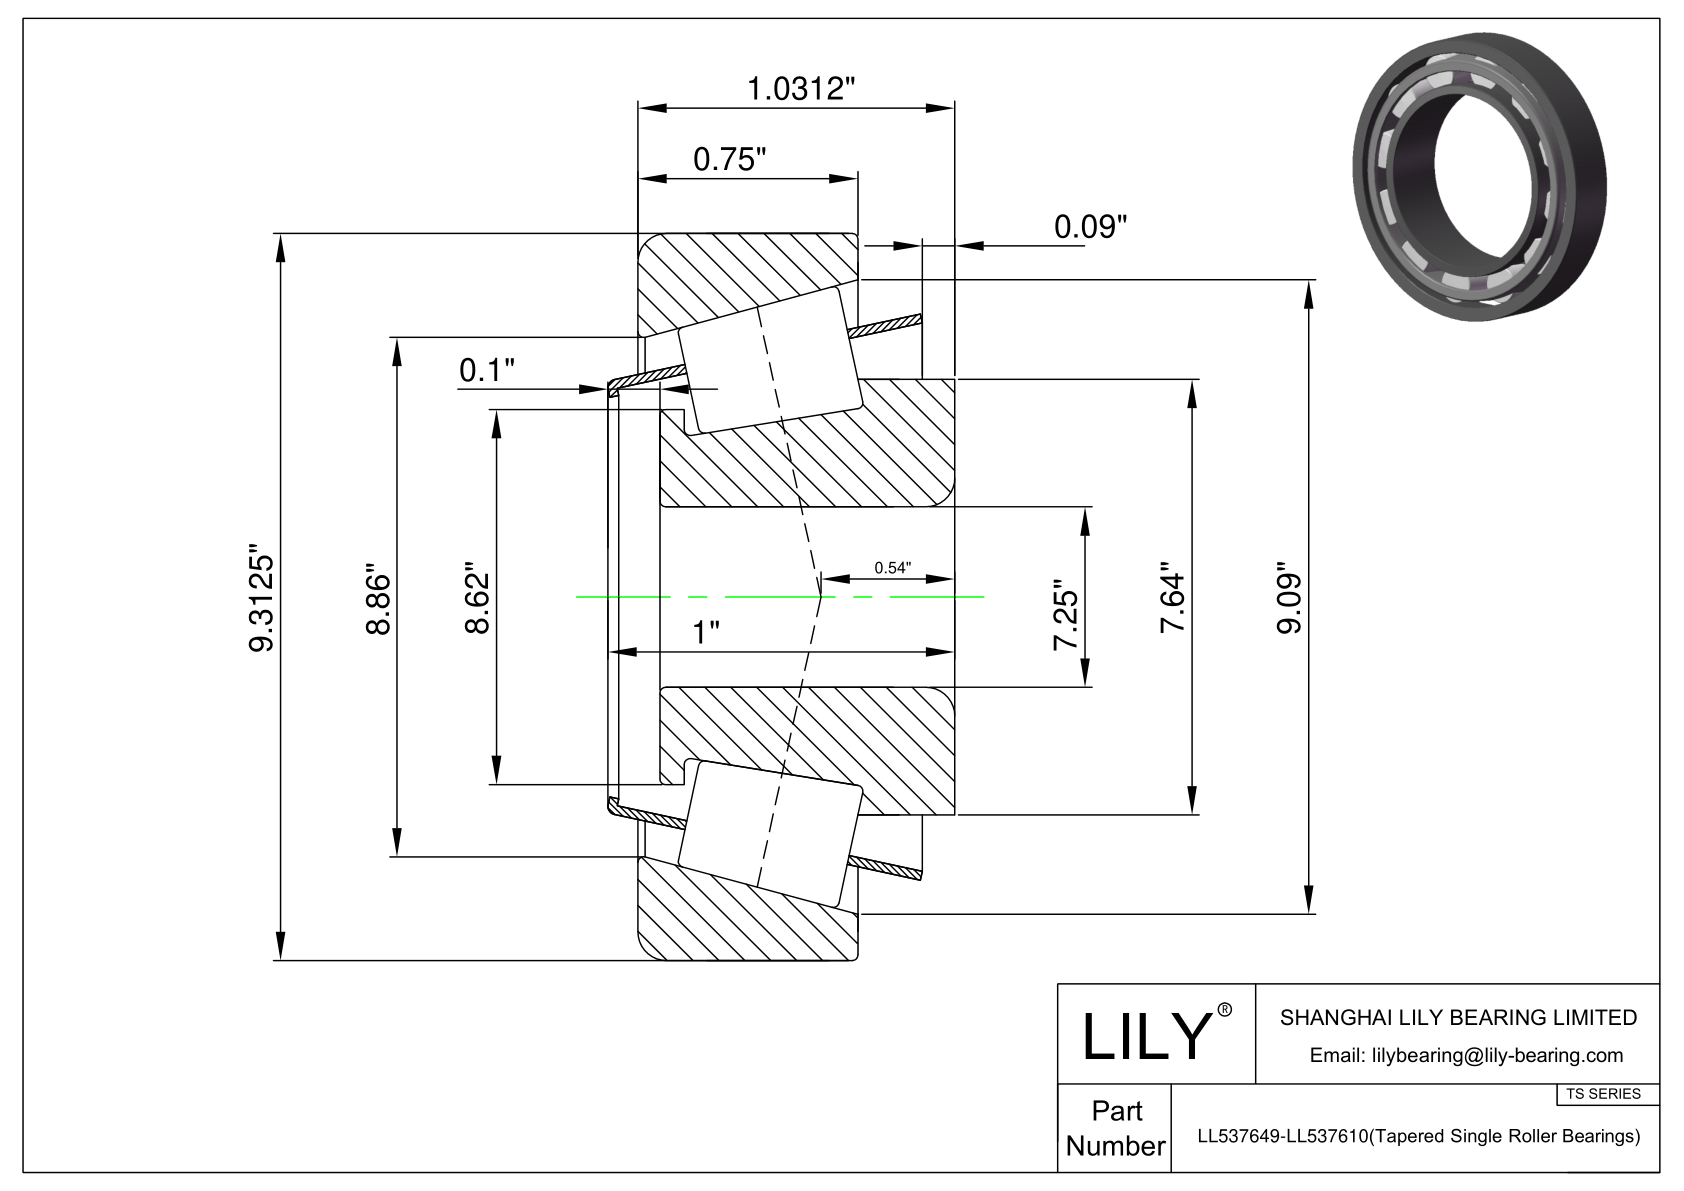 LL537649-LL537610 TS (Tapered Single Roller Bearings) (Imperial) cad drawing